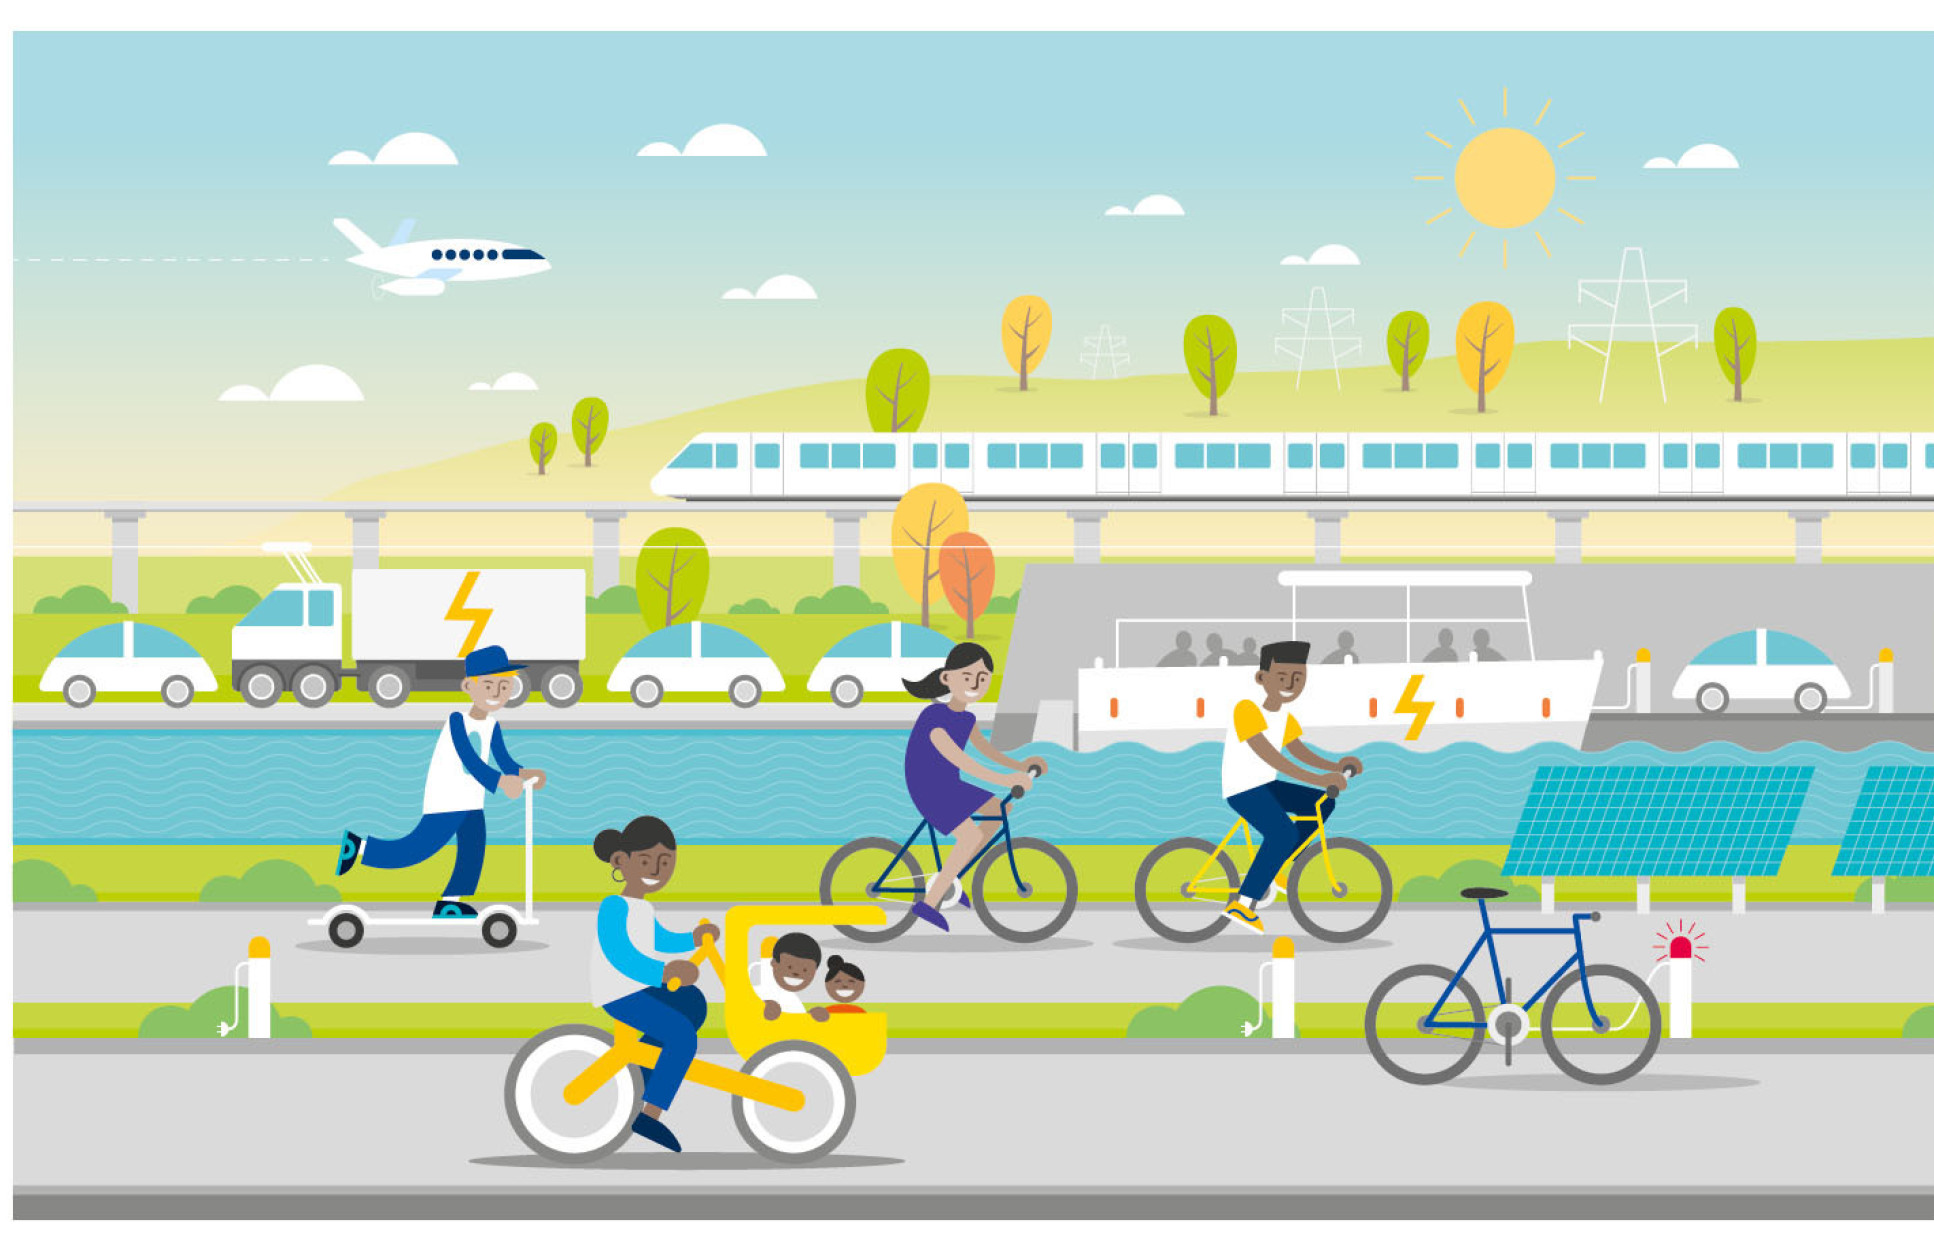 Graphic showing cityscape with trains, electric vehicles, cyclists, and people on scooters